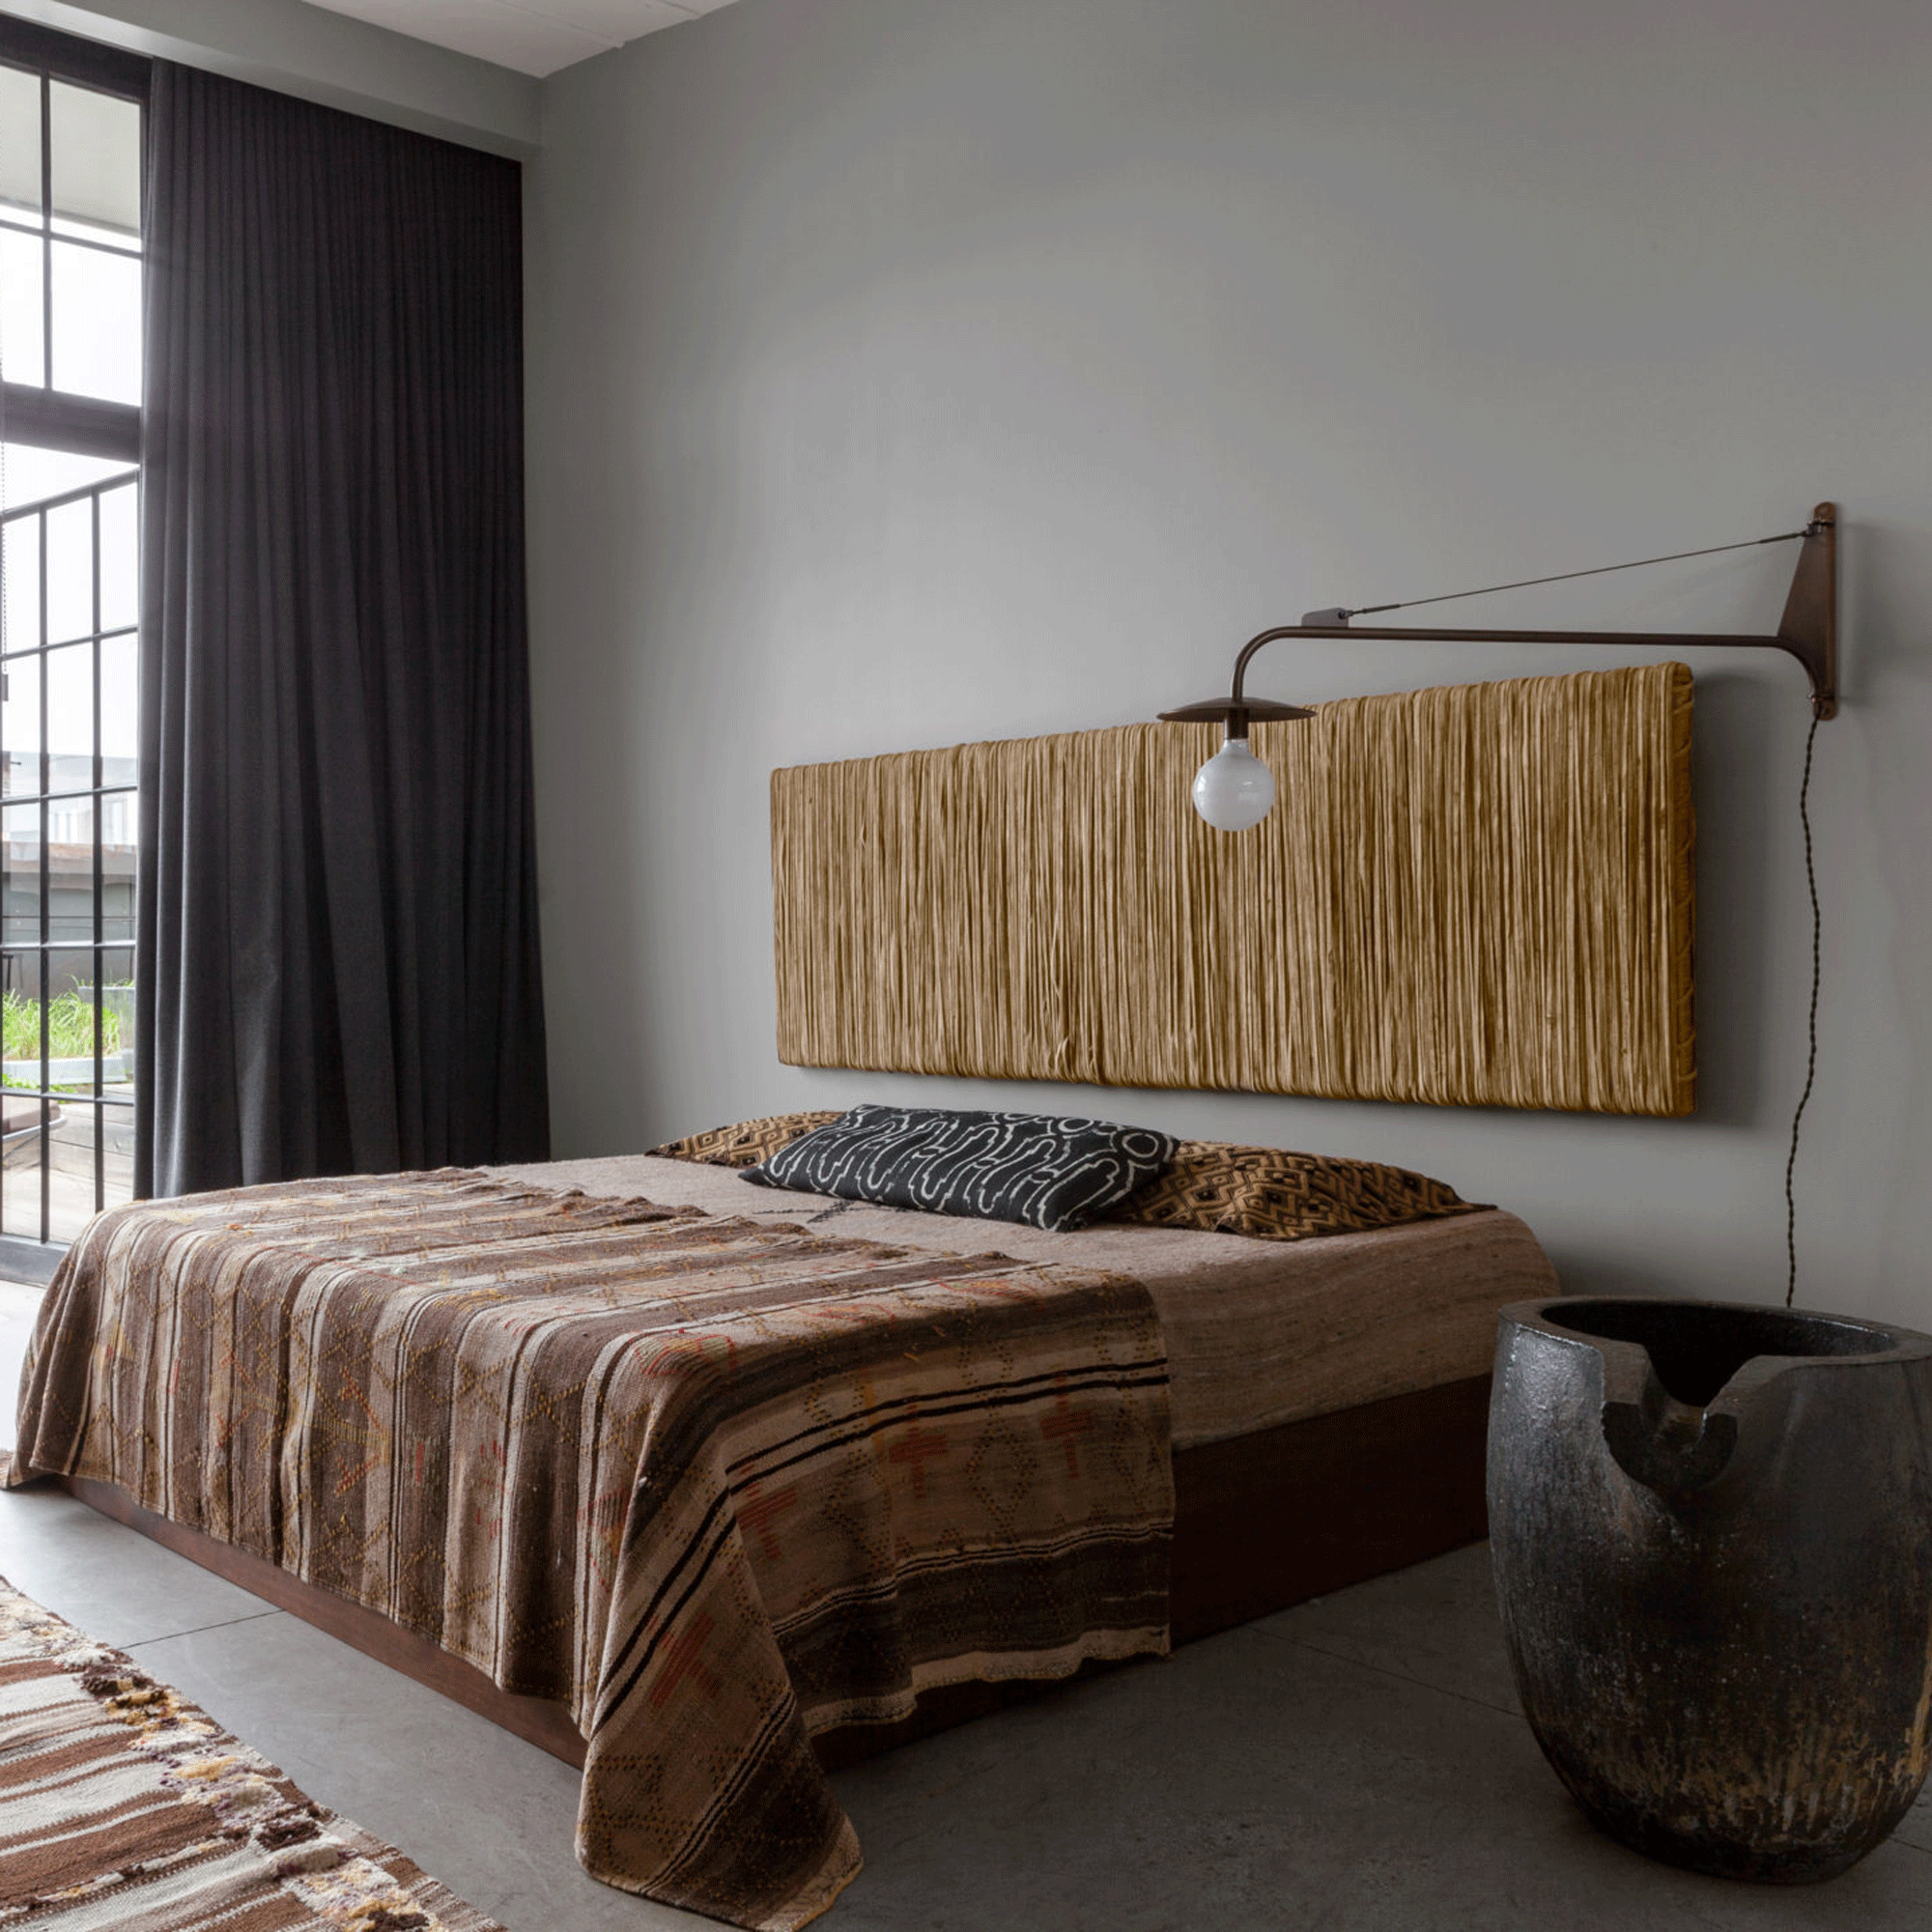 Grey bedroom with a raffia headboard that also acts as a piece of art